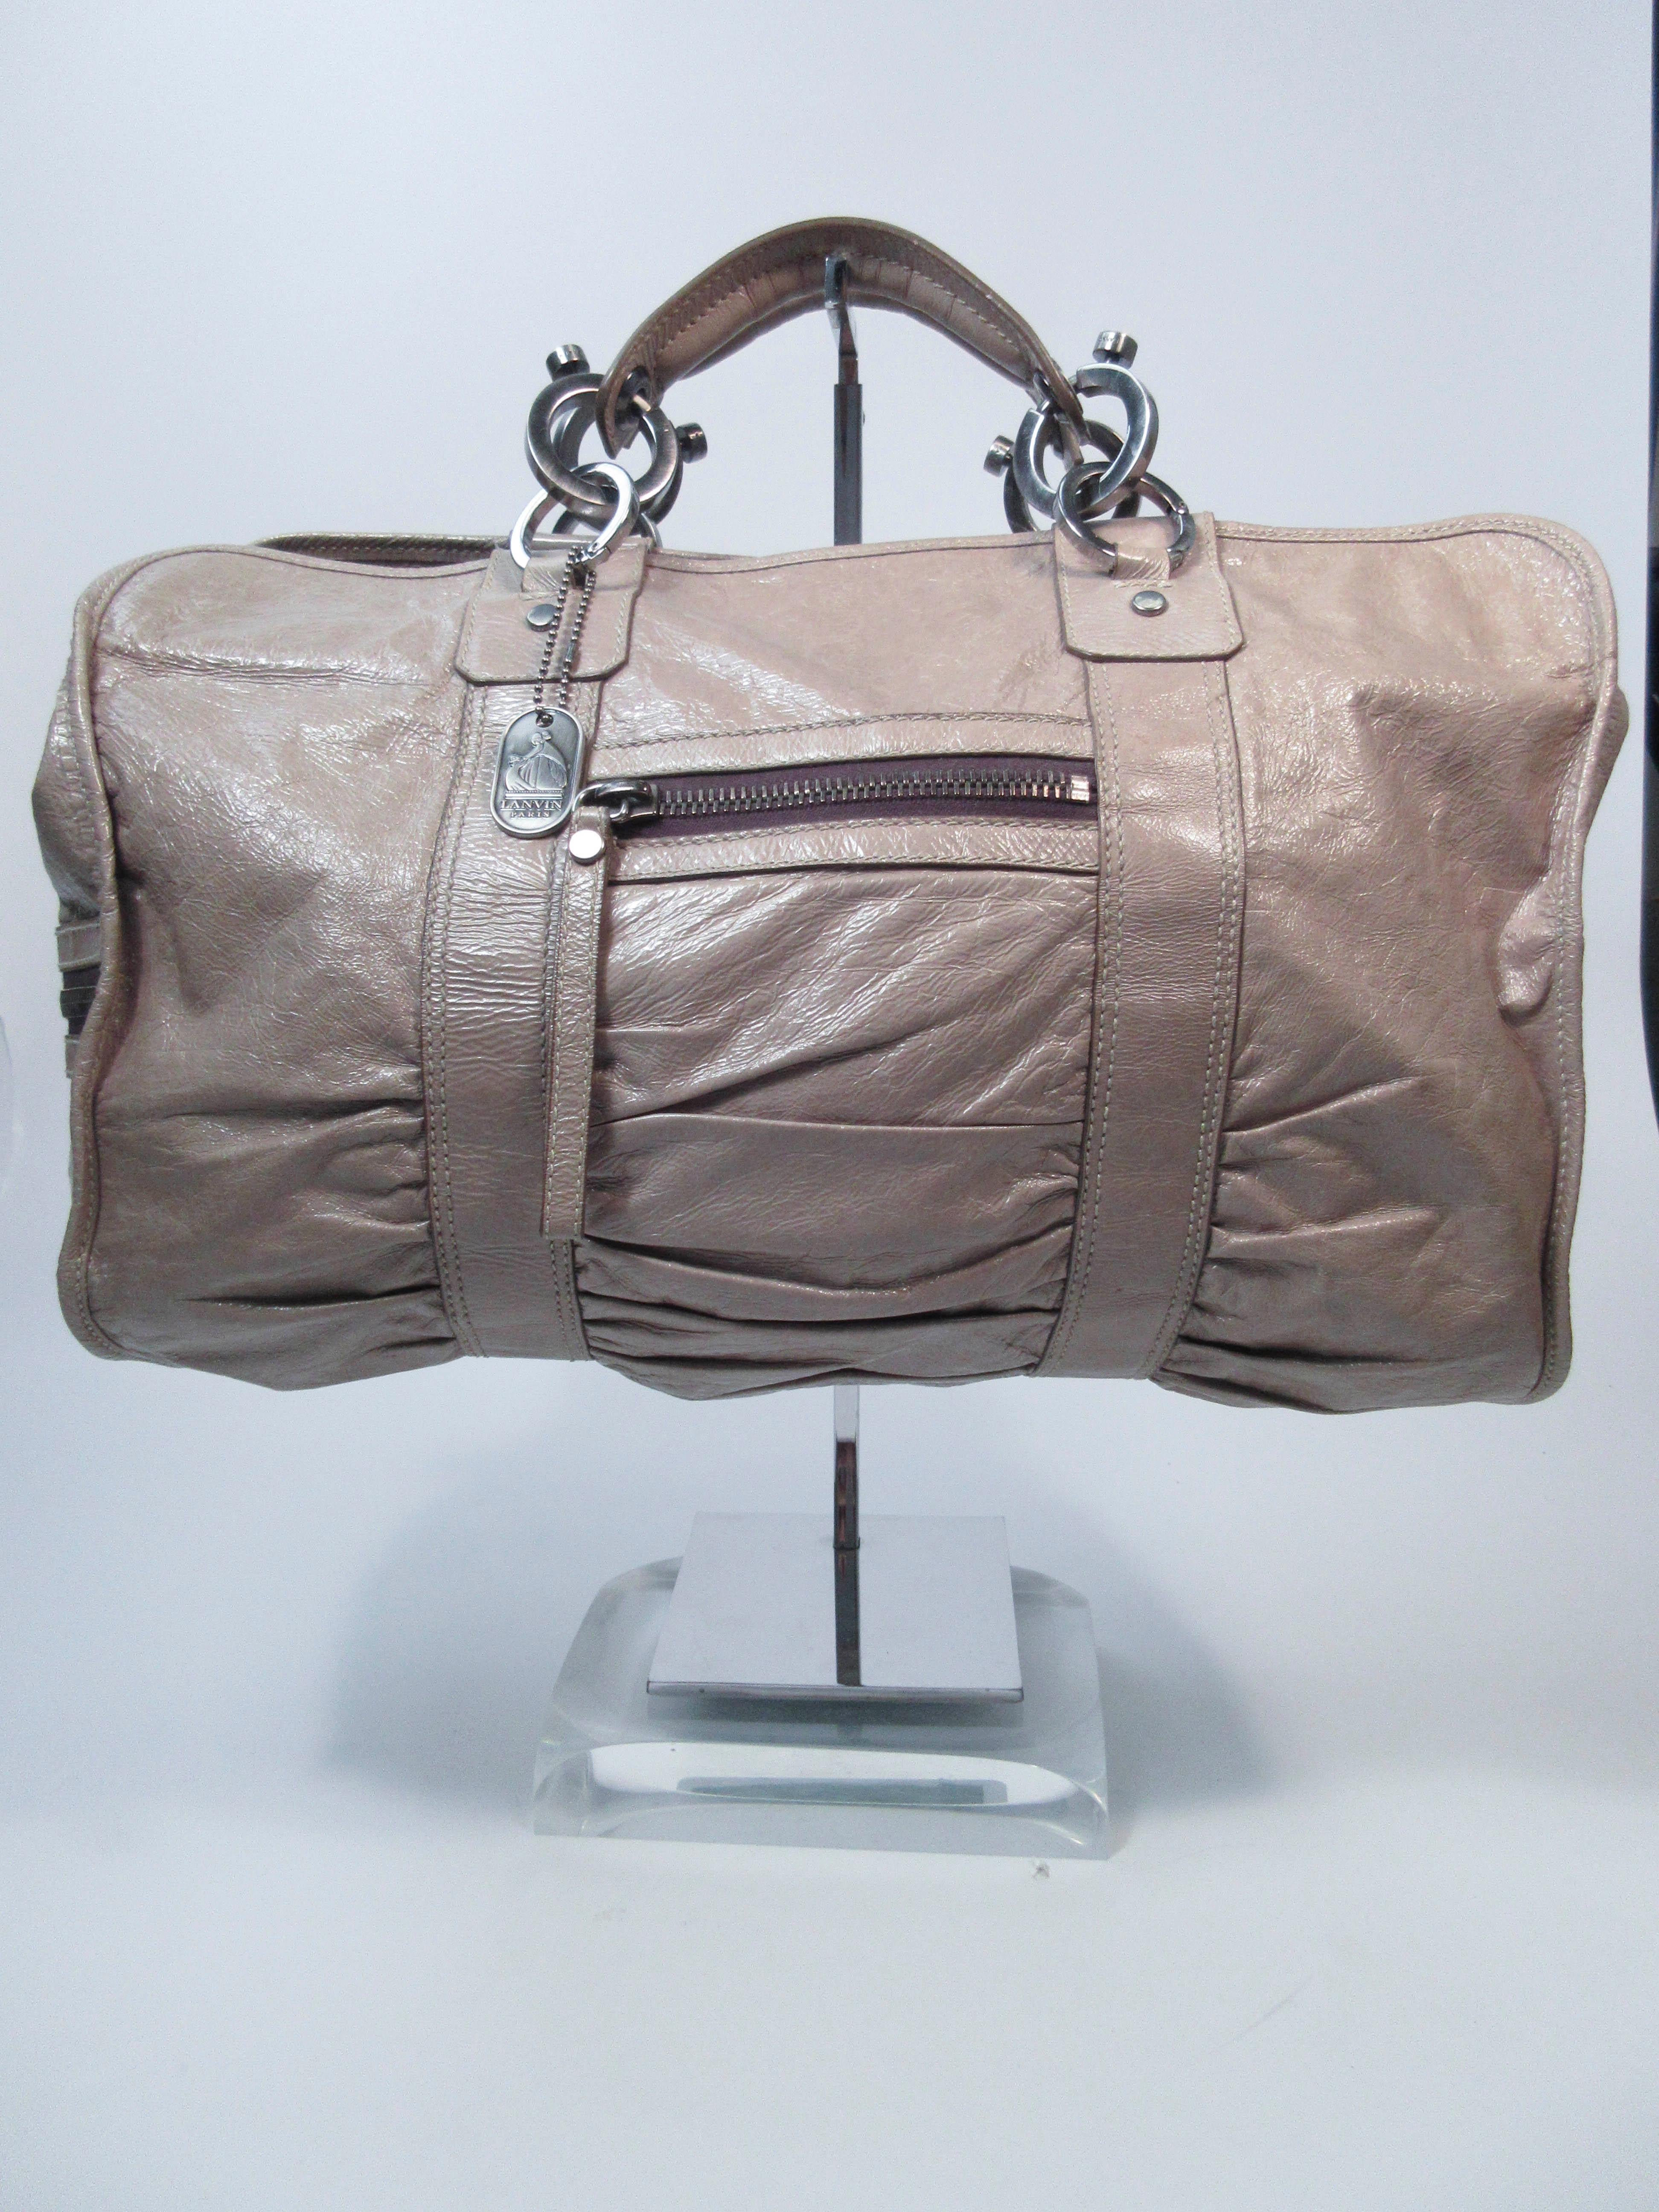 This Lanvin is composed of a taupe patent leather with silver-tone hardware & mechanism. Features exterior zipper pockets with two interior slide pockets. In used pre-owned condition (signs of wear due to age, and heavy interior use/marks, see